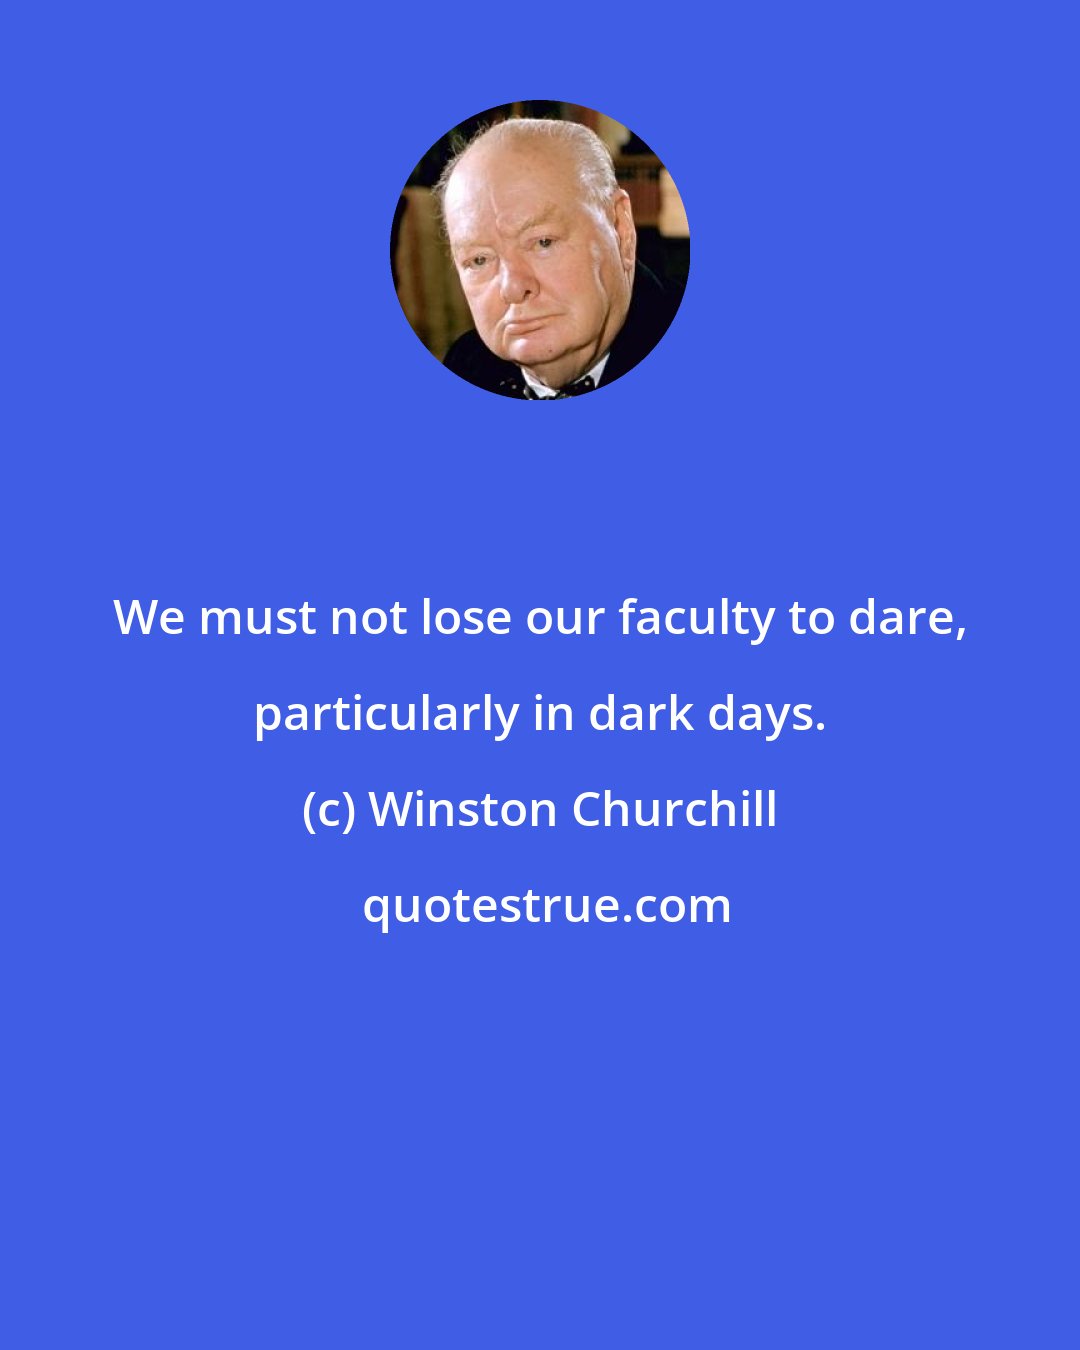 Winston Churchill: We must not lose our faculty to dare, particularly in dark days.